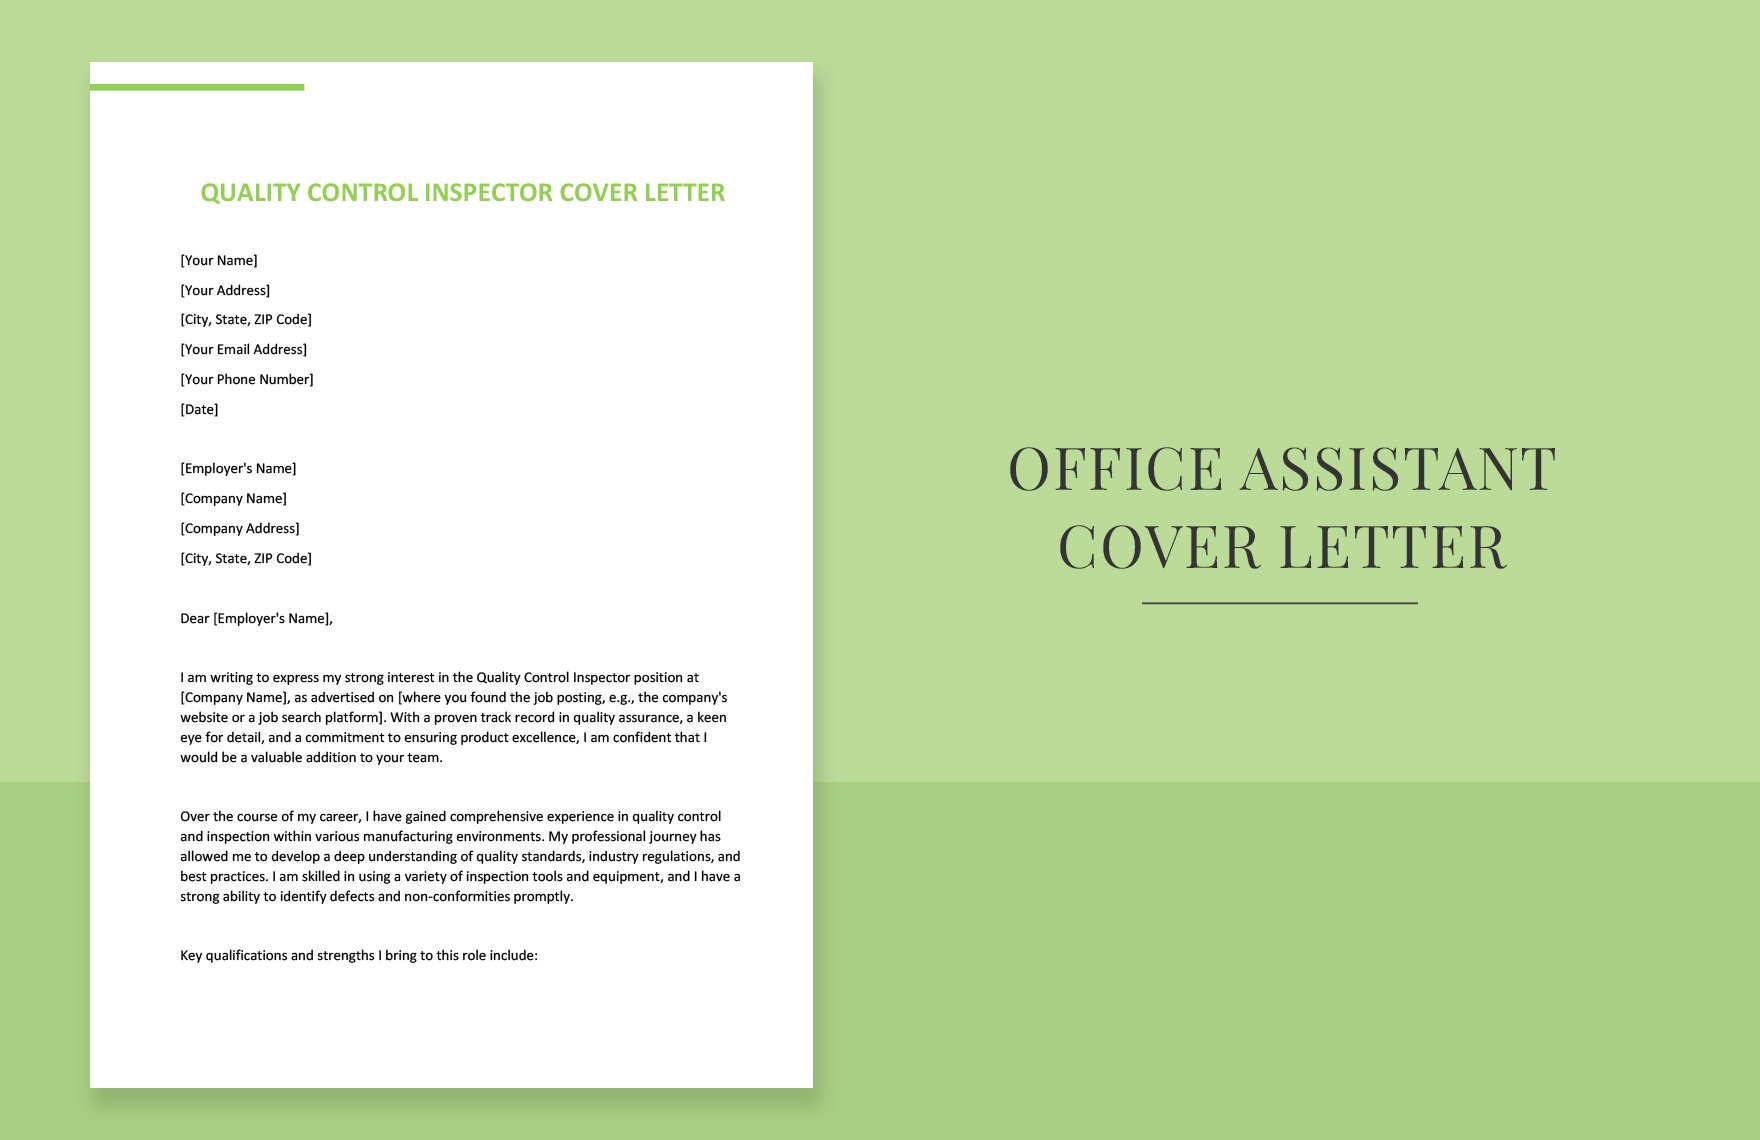 Quality Control Inspector Cover Letter in Word, Google Docs